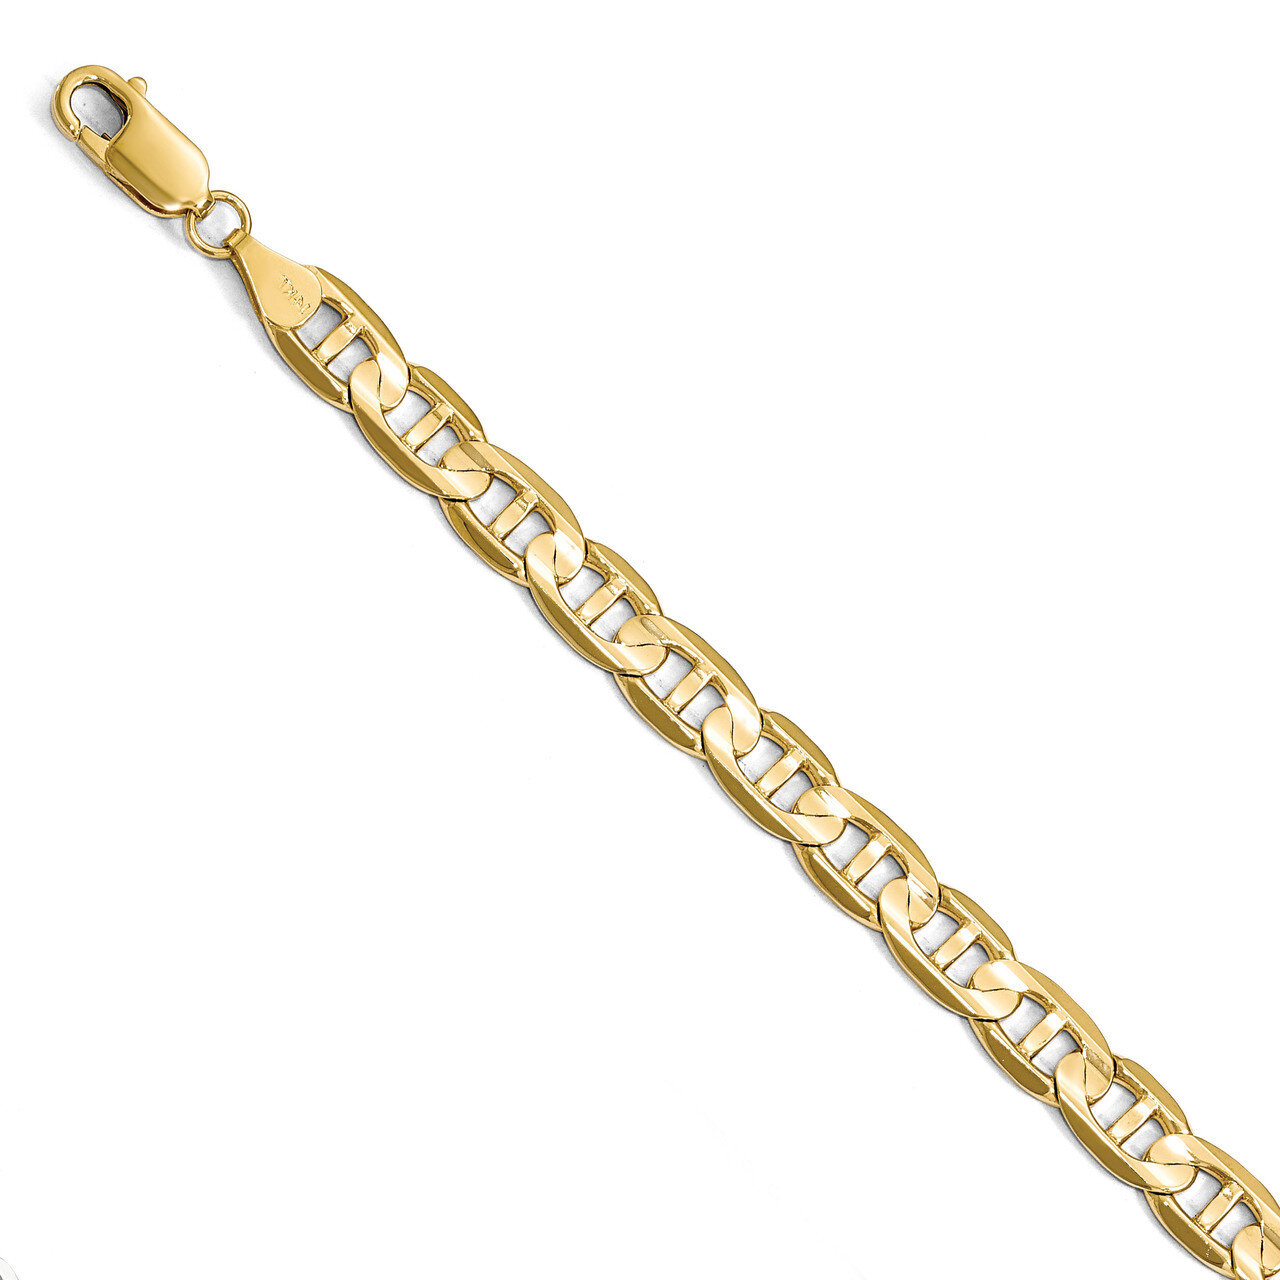 7mm Concave Anchor Chain 9 Inch 14k Gold HB-1319-9